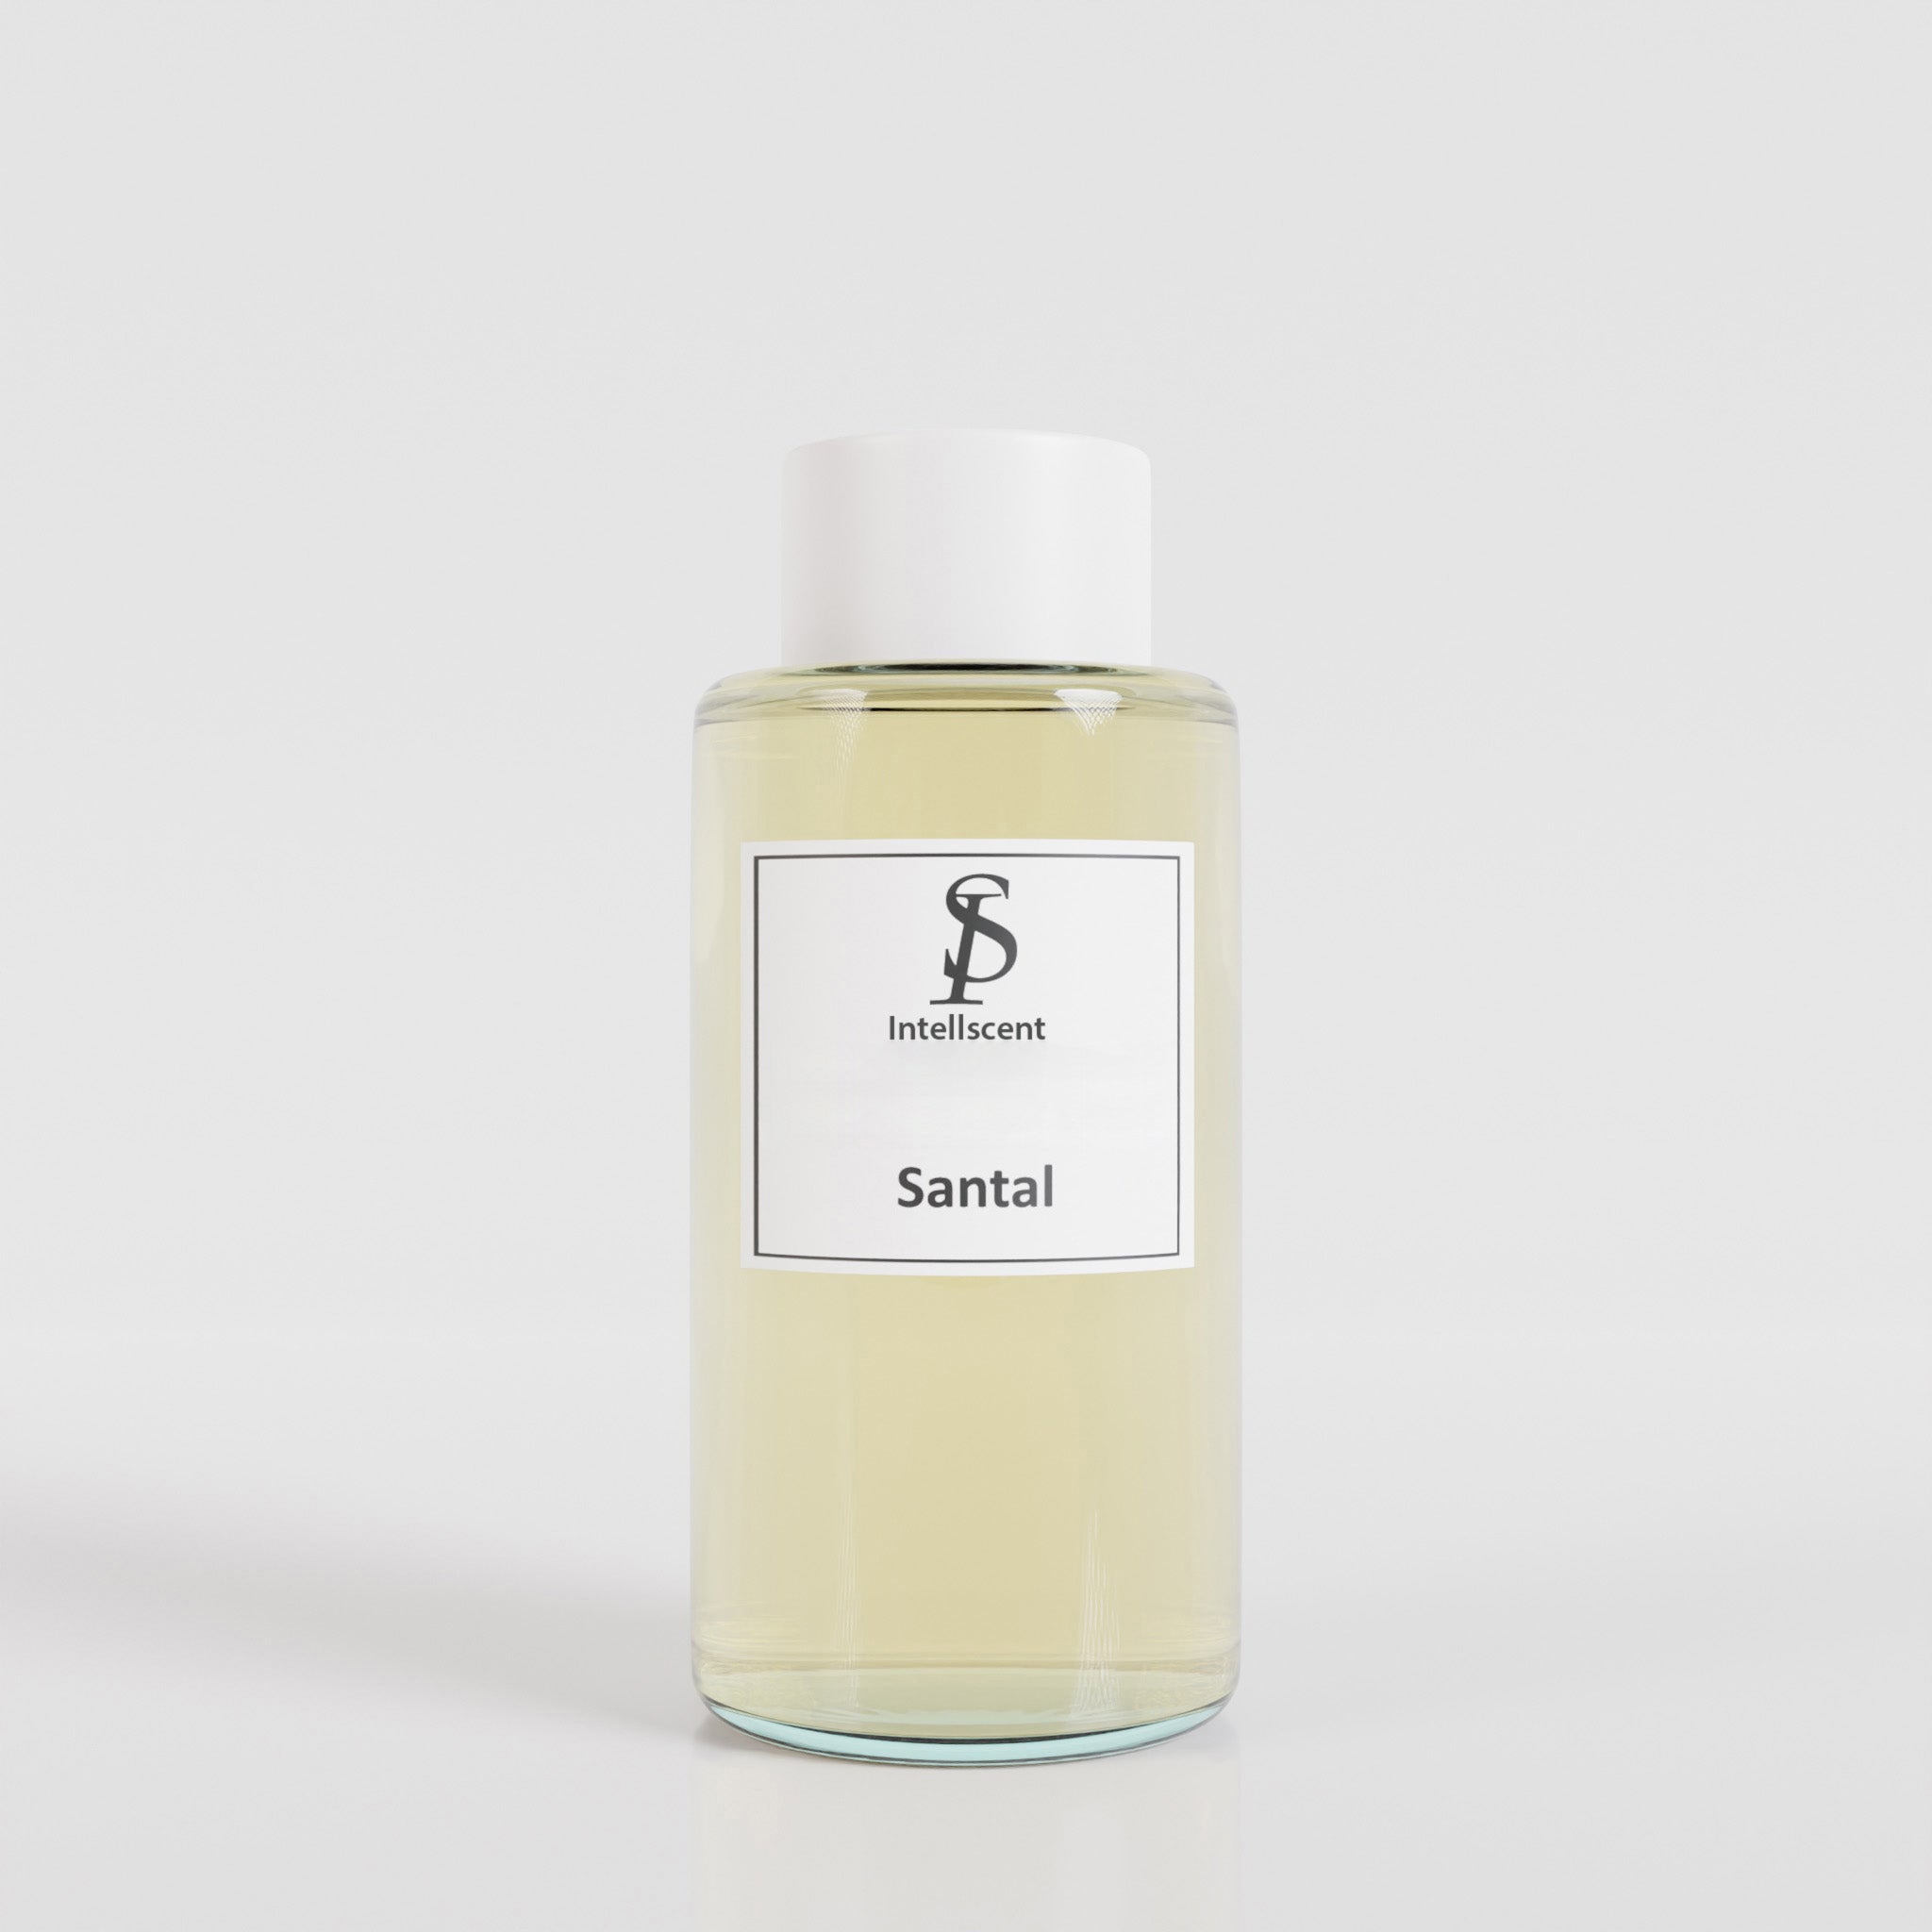 NueScent Santal Diffuser Oil - Santal Essential Oil Blend for Scent  Diffusers - Santal Oil - Sandalwood, Cardamom Cedarwood Notes - Suitable  for Cold